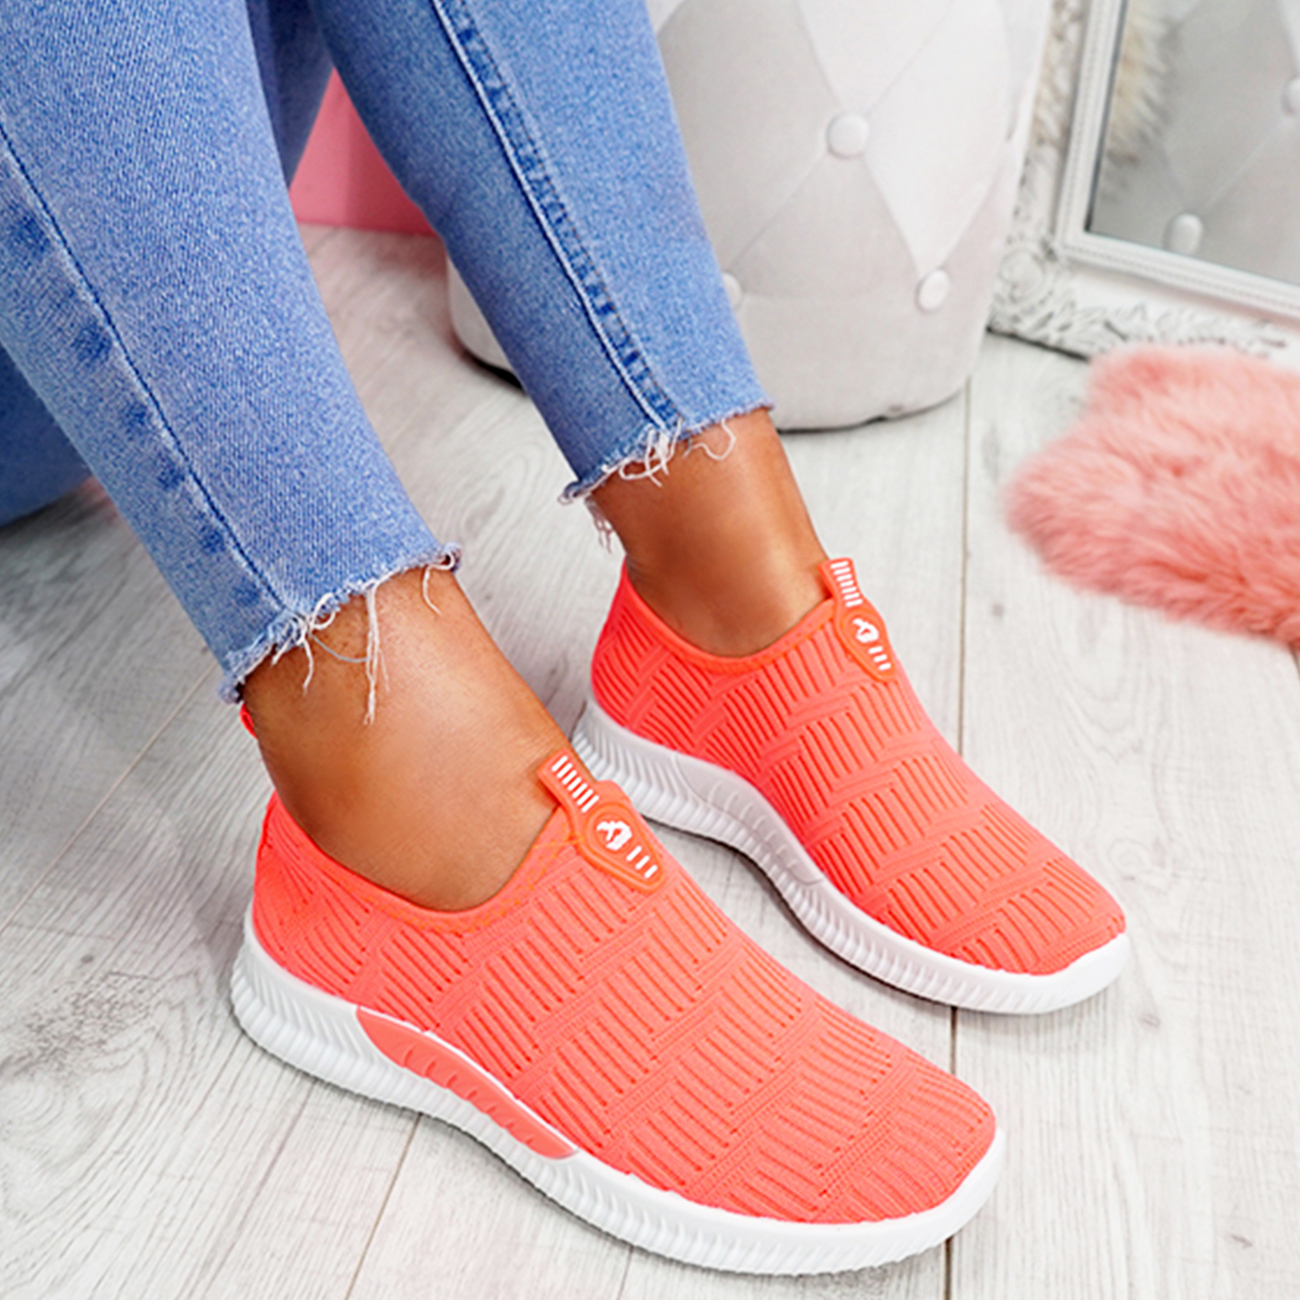 WOMENS LADIES KNIT SPORT TRAINERS SLIP ON RUNNING SNEAKERS WOMEN PARTY SHOES